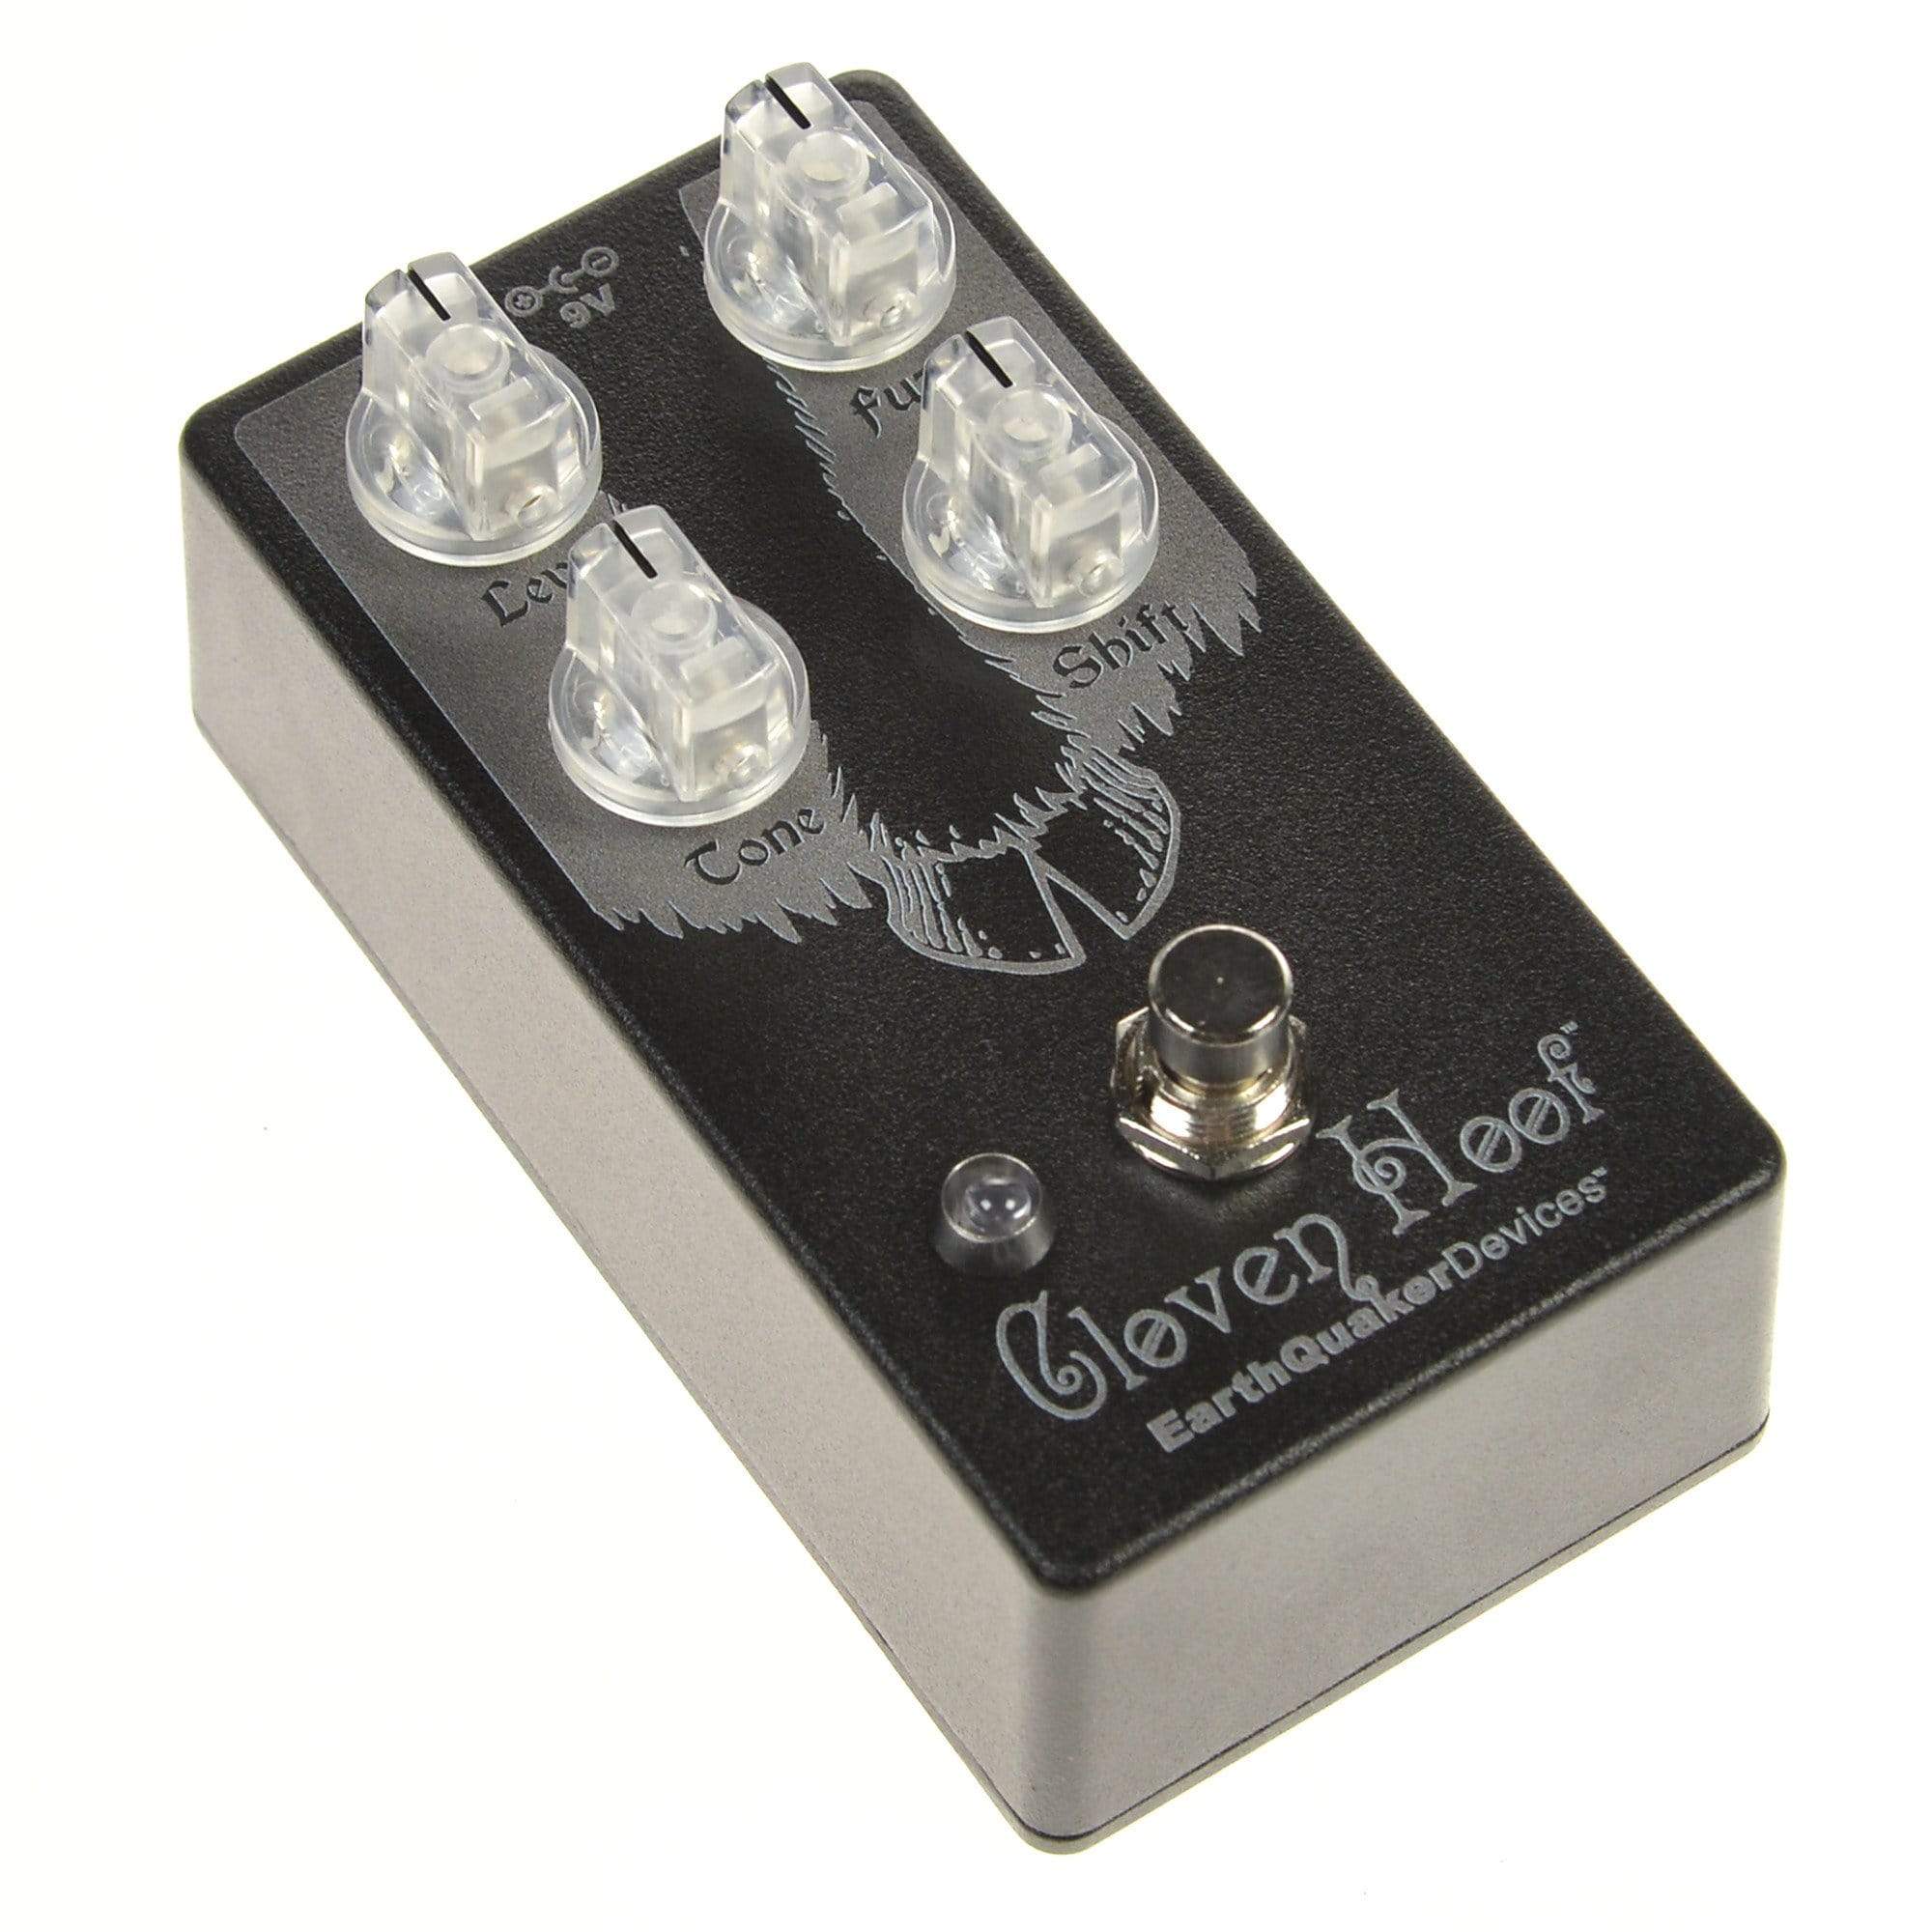 Earthquaker Devices Cloven Hoof v2 Inverse Black – Chicago Music 